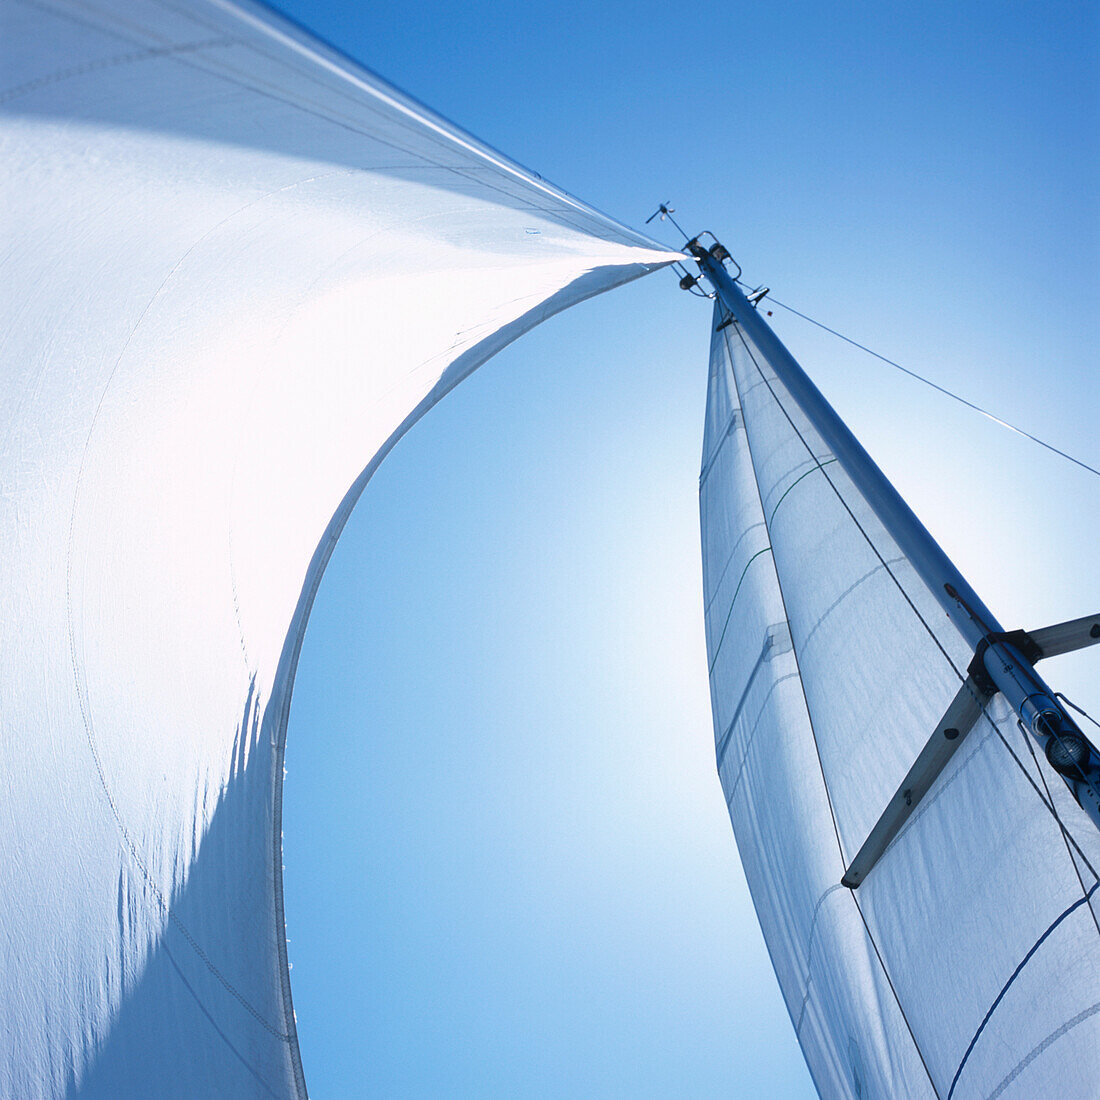 Mast with mainsail and foresail of a sailboat